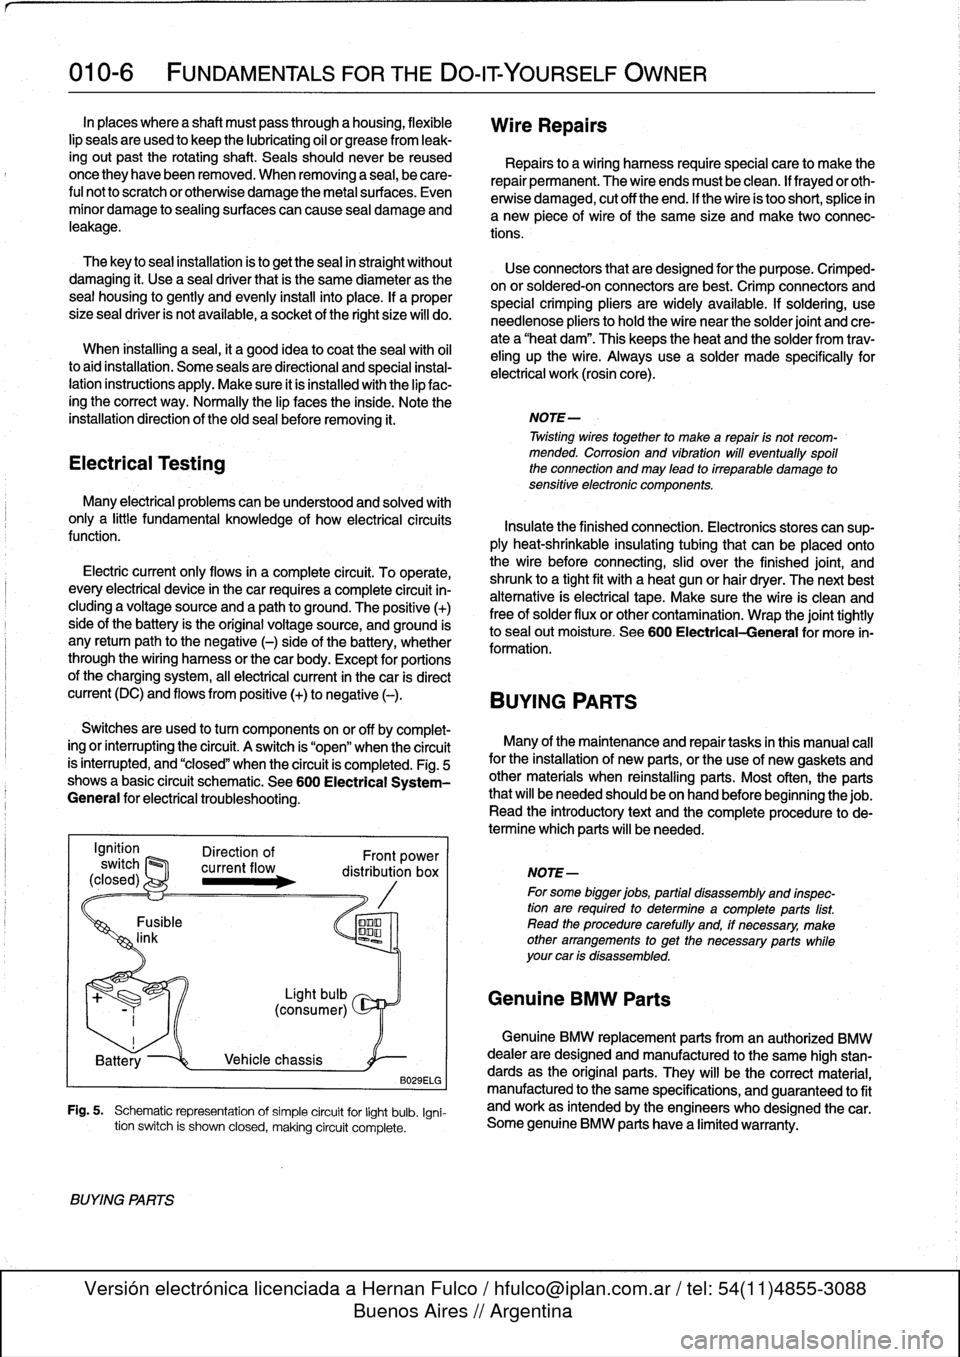 BMW M3 1993 E36 Workshop Manual 
010-
6

	

FUNDAMENTALS
FOR
THE
DO-ITYOURSELF
OWNER

In
places
where
a
shaft
mustpass
through
a
housing,
flexible
lip
seals
areused
to
keep
the
lubricating
oil
or
grease
from
leak-

ingout
past
the
r